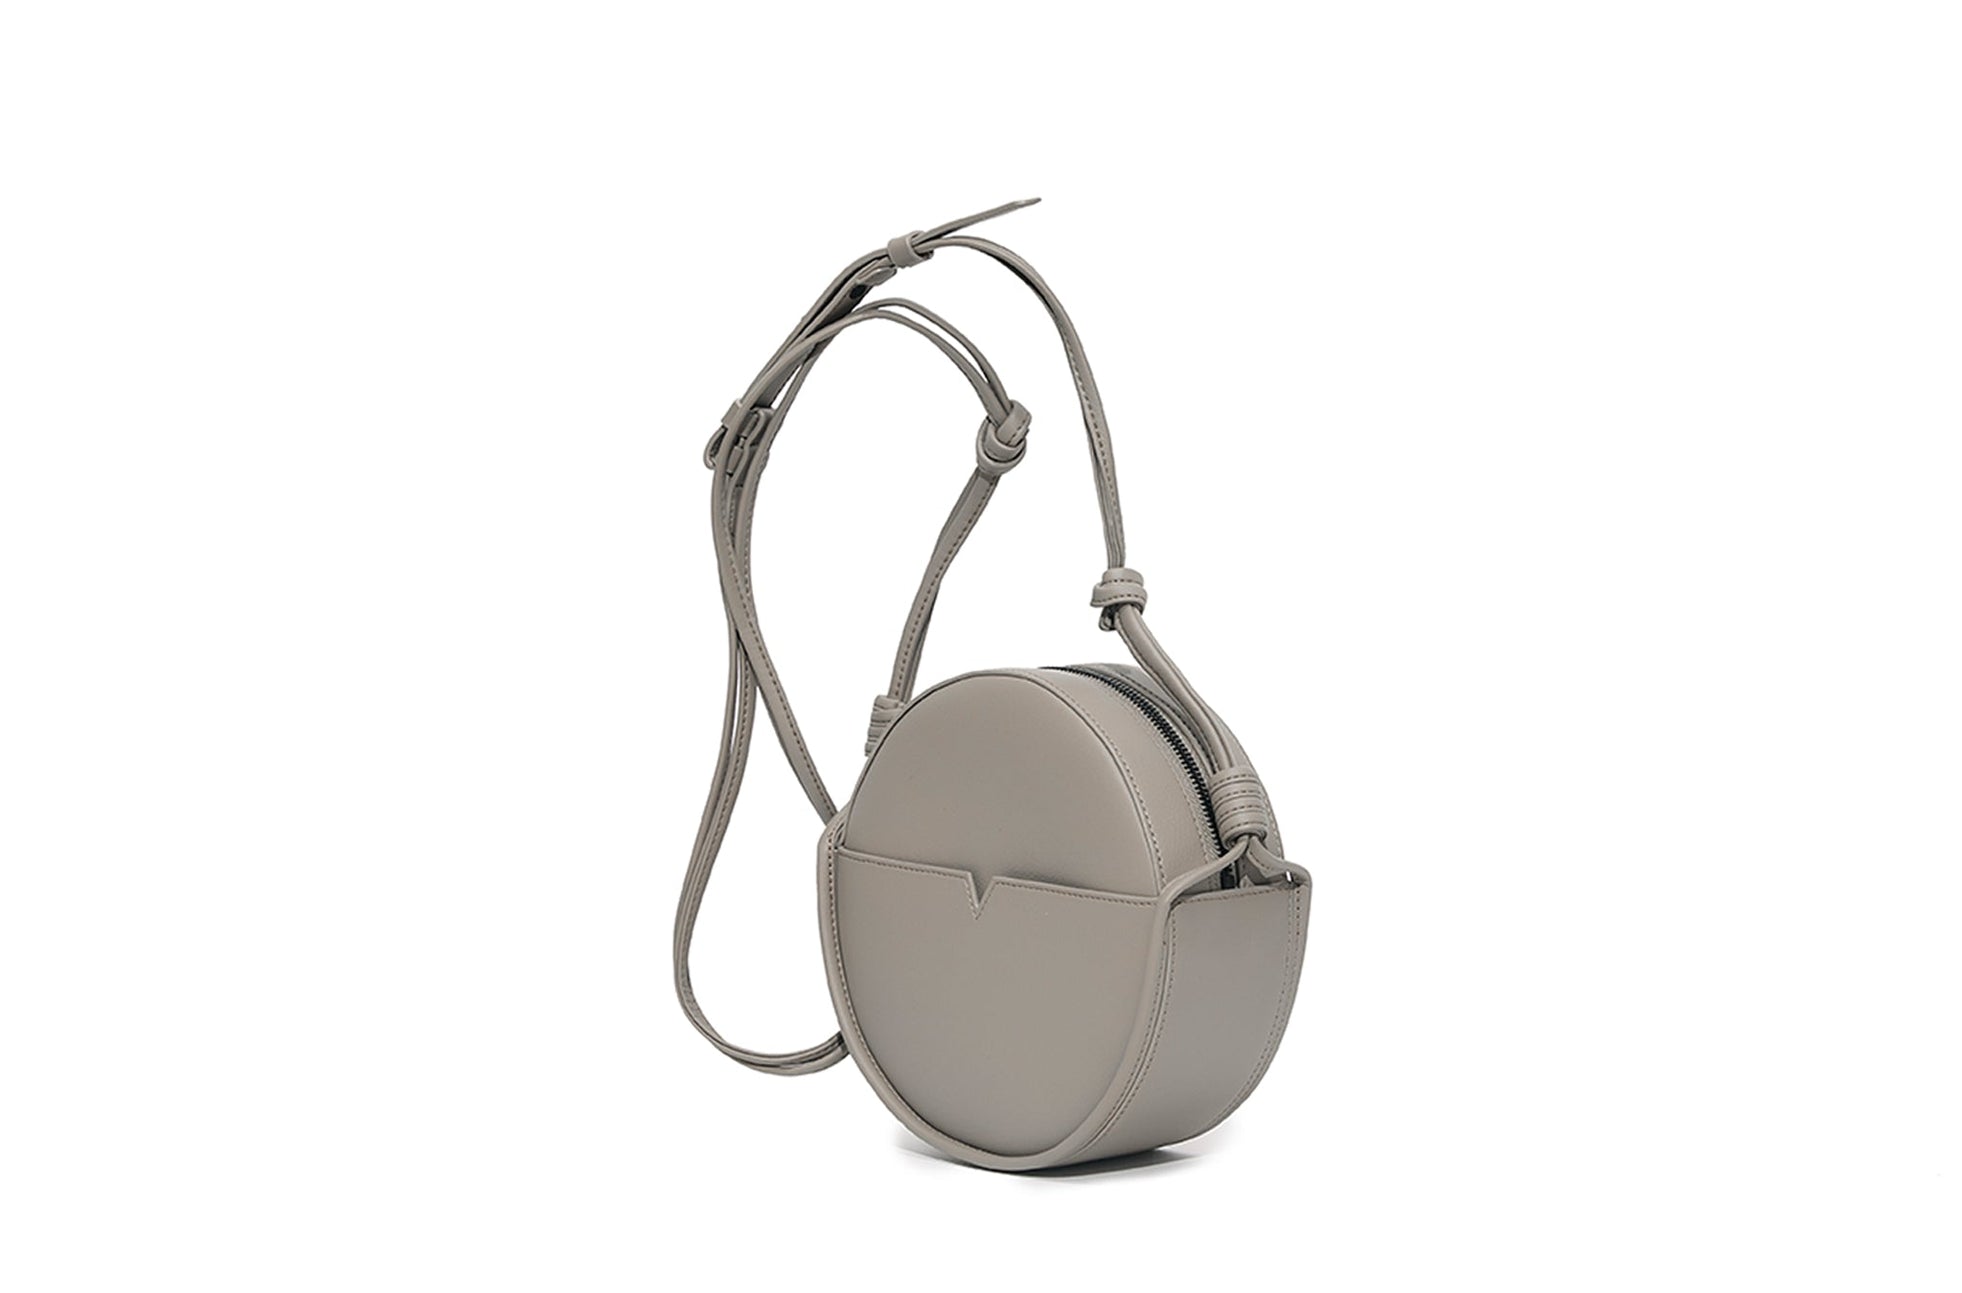 The Circle Crossbody - Sample Sale in Banbū in Stone image 3